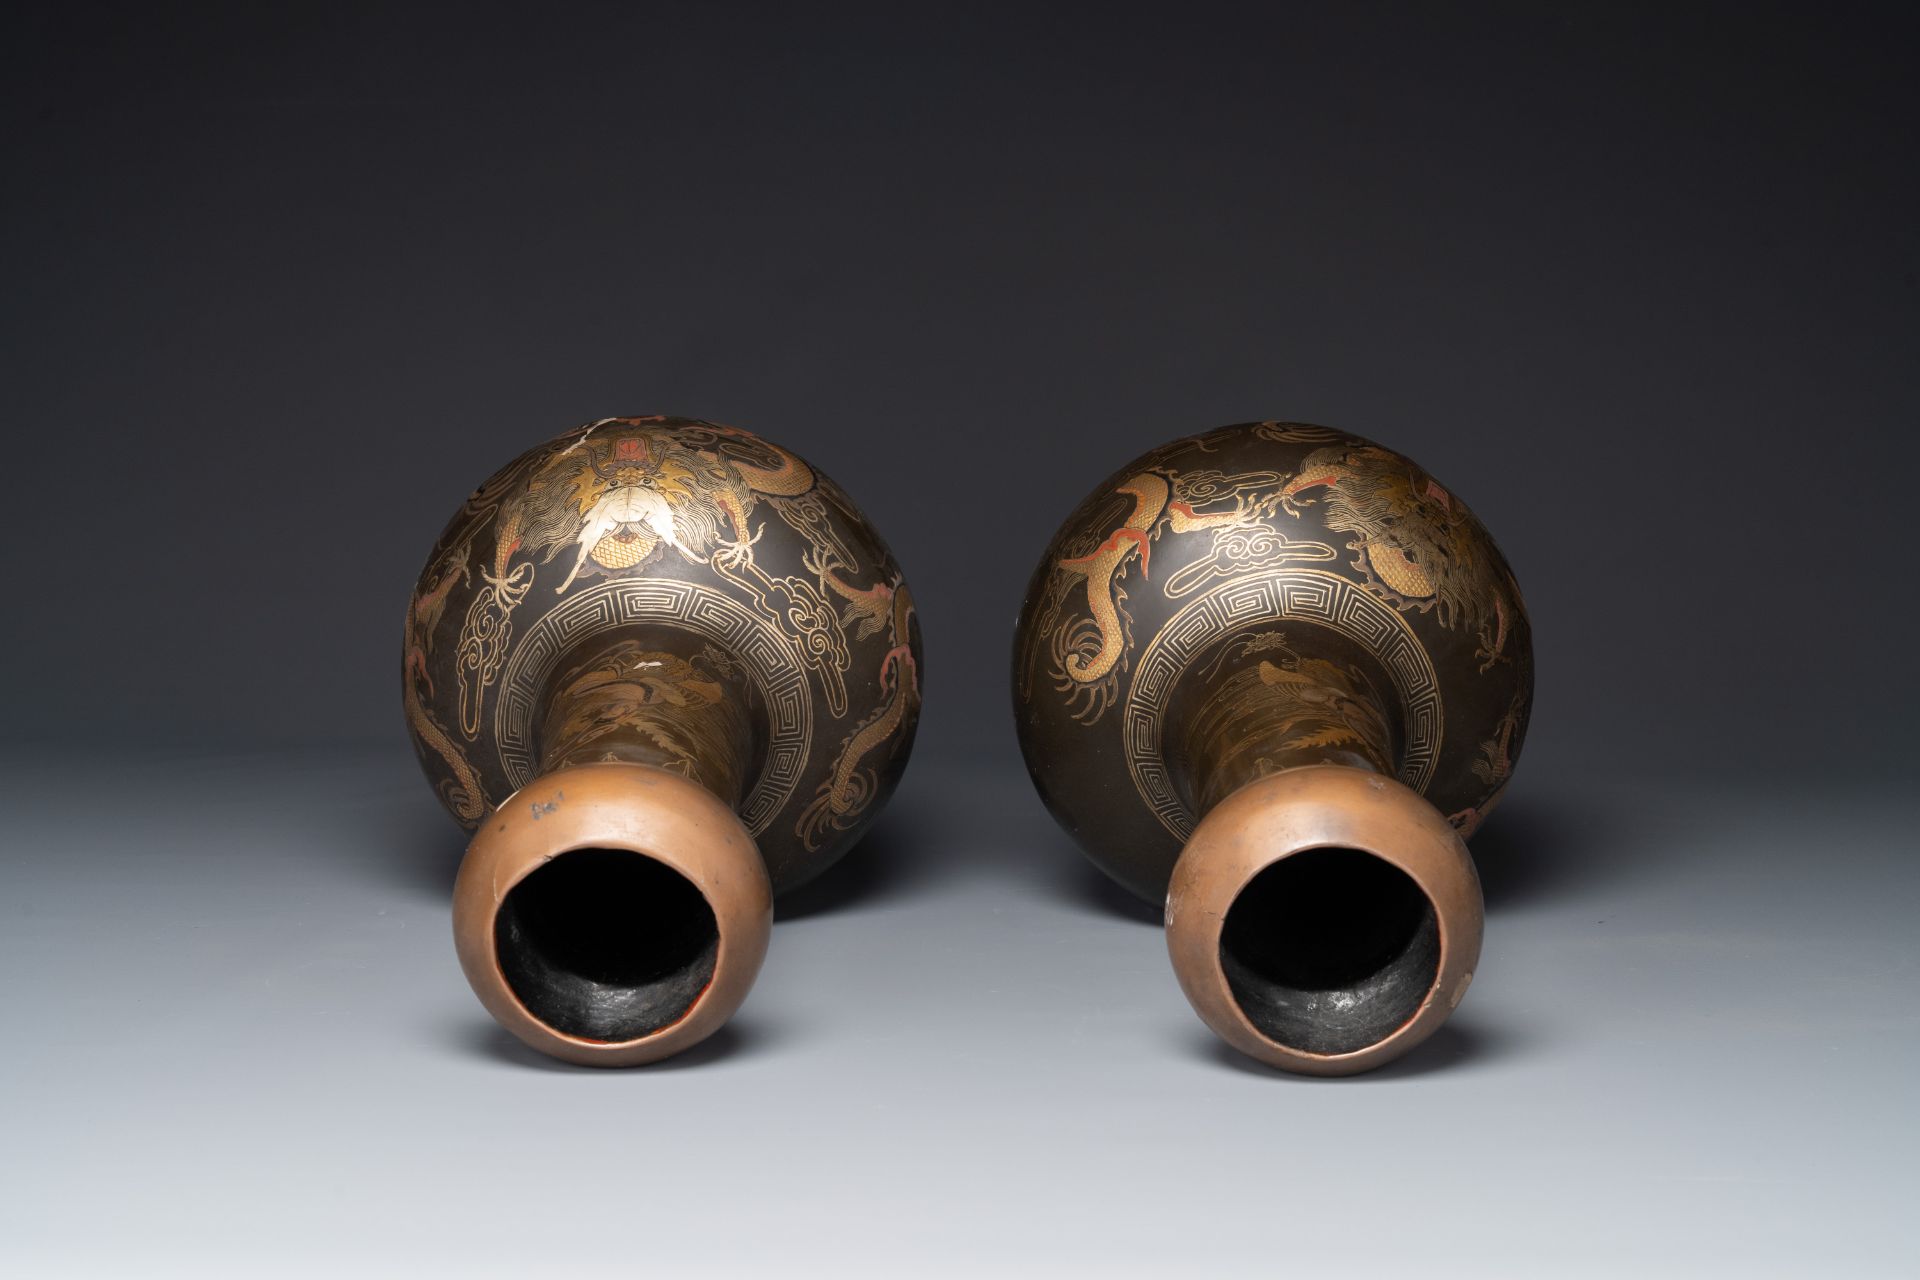 Seven Chinese Foochow or Fuzhou lacquerware vases, various marks, 19/20th C. - Image 10 of 11